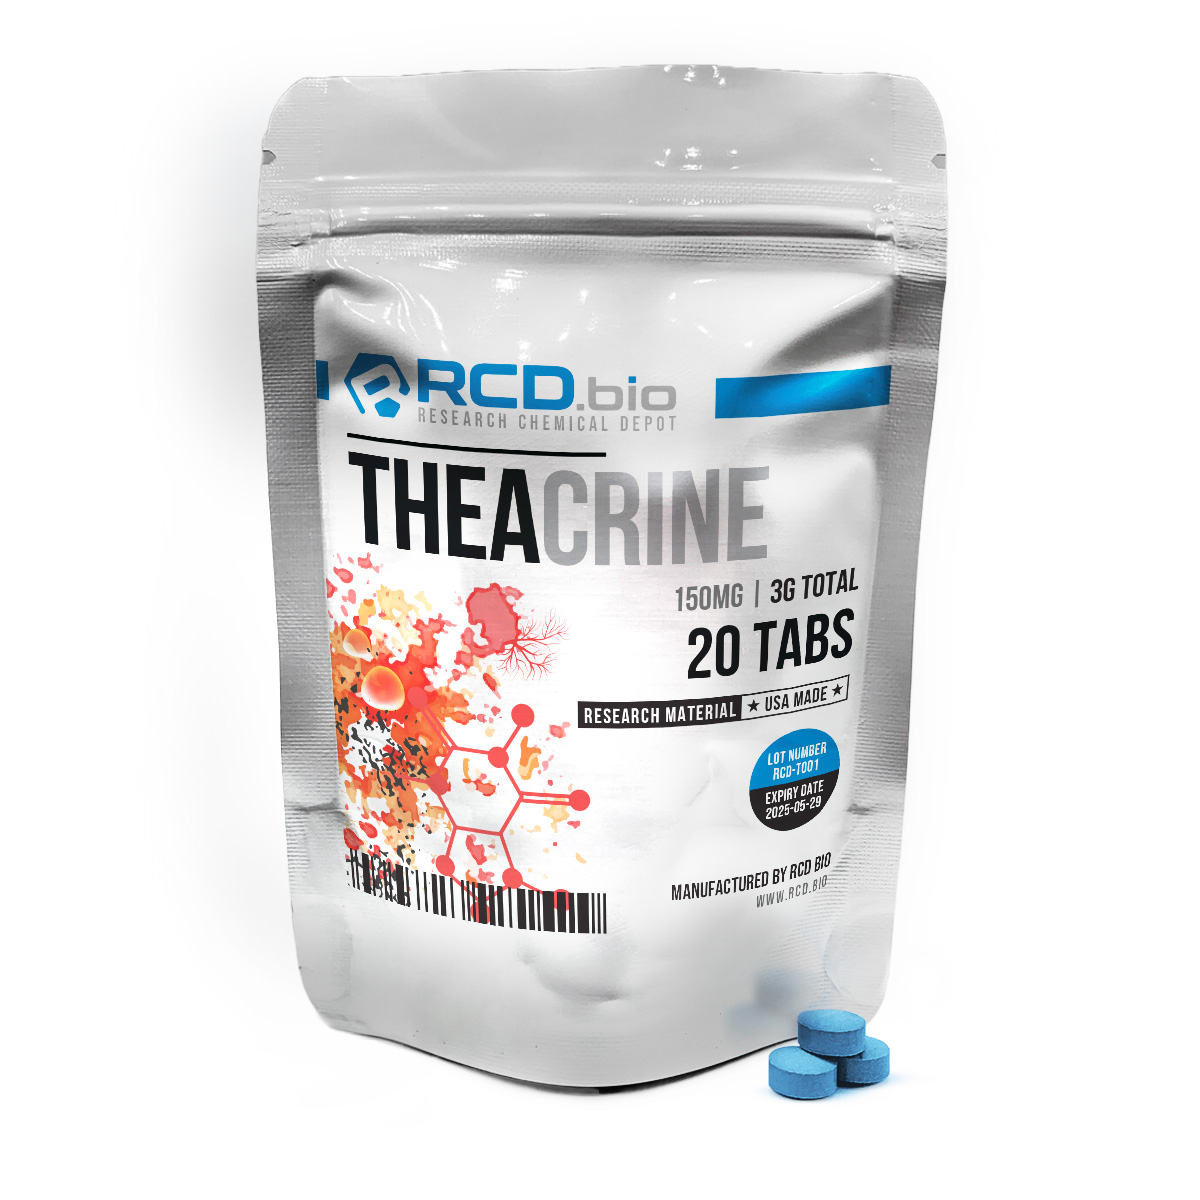 Buy Theacrine Tablets from RCD.bio in USA. At RCD.bio all our compounds are 3rd party tested to ensure quality and purity. Buy Now!